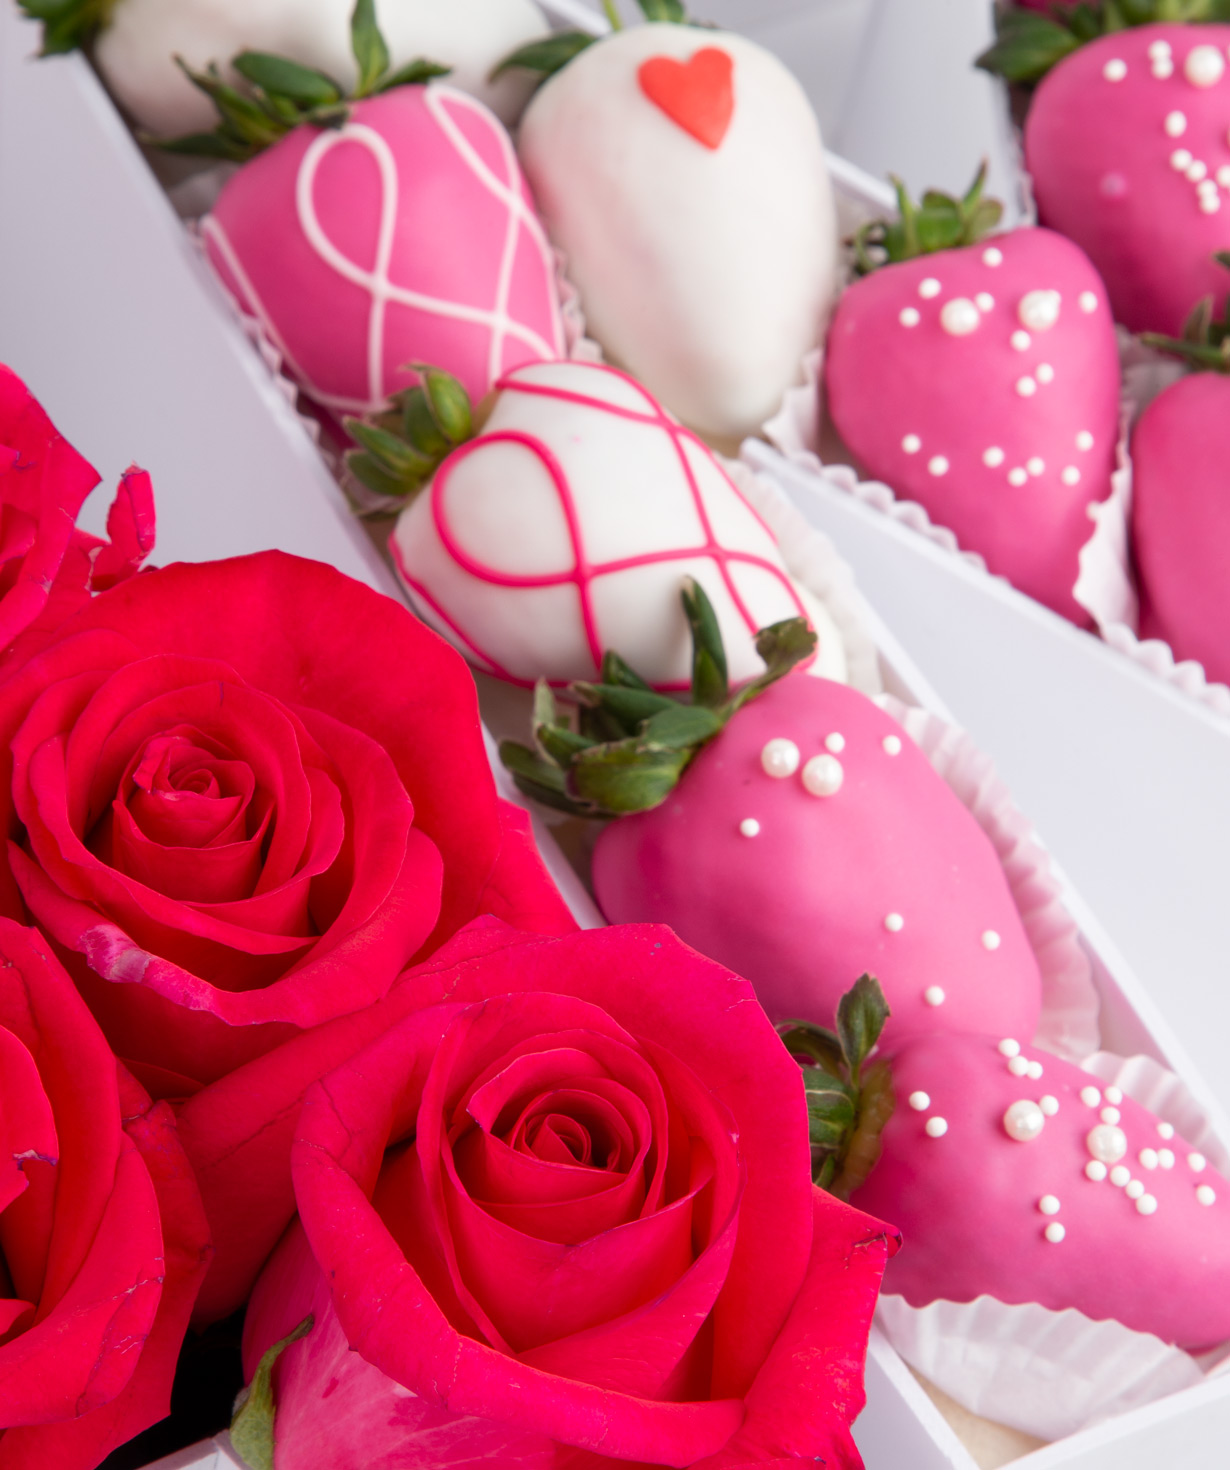 Gift box ''Sweet Elak'' with roses and chocolate covered strawberries